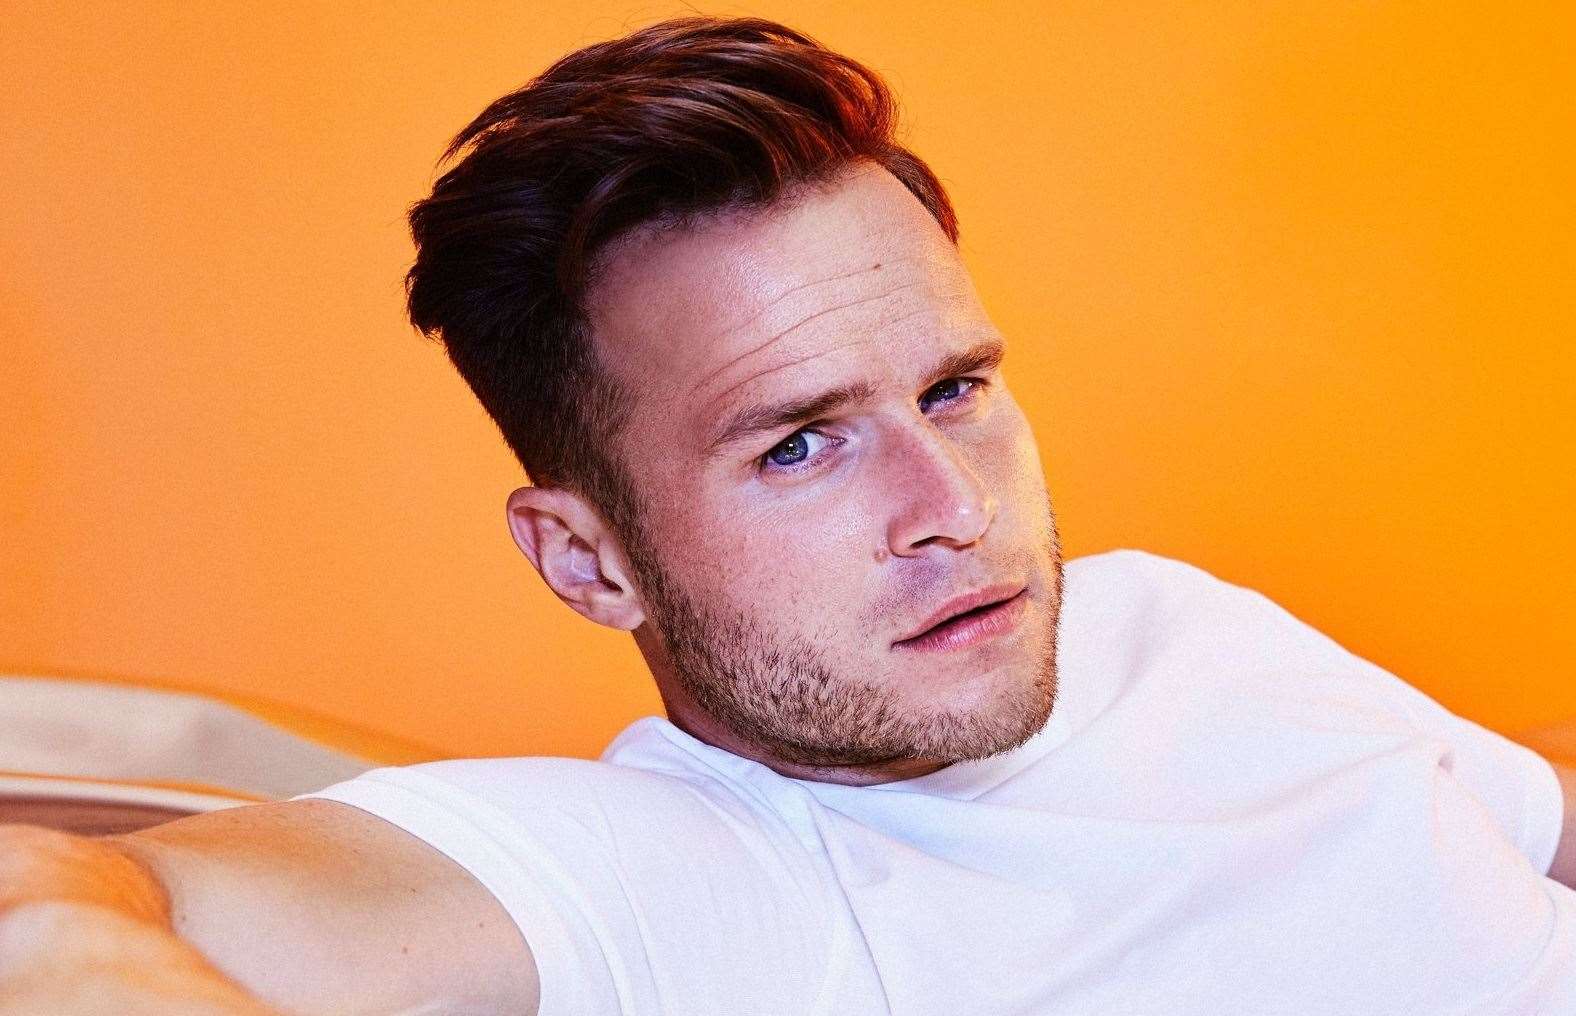 Olly Murs will bring his tour to Kent in 2021